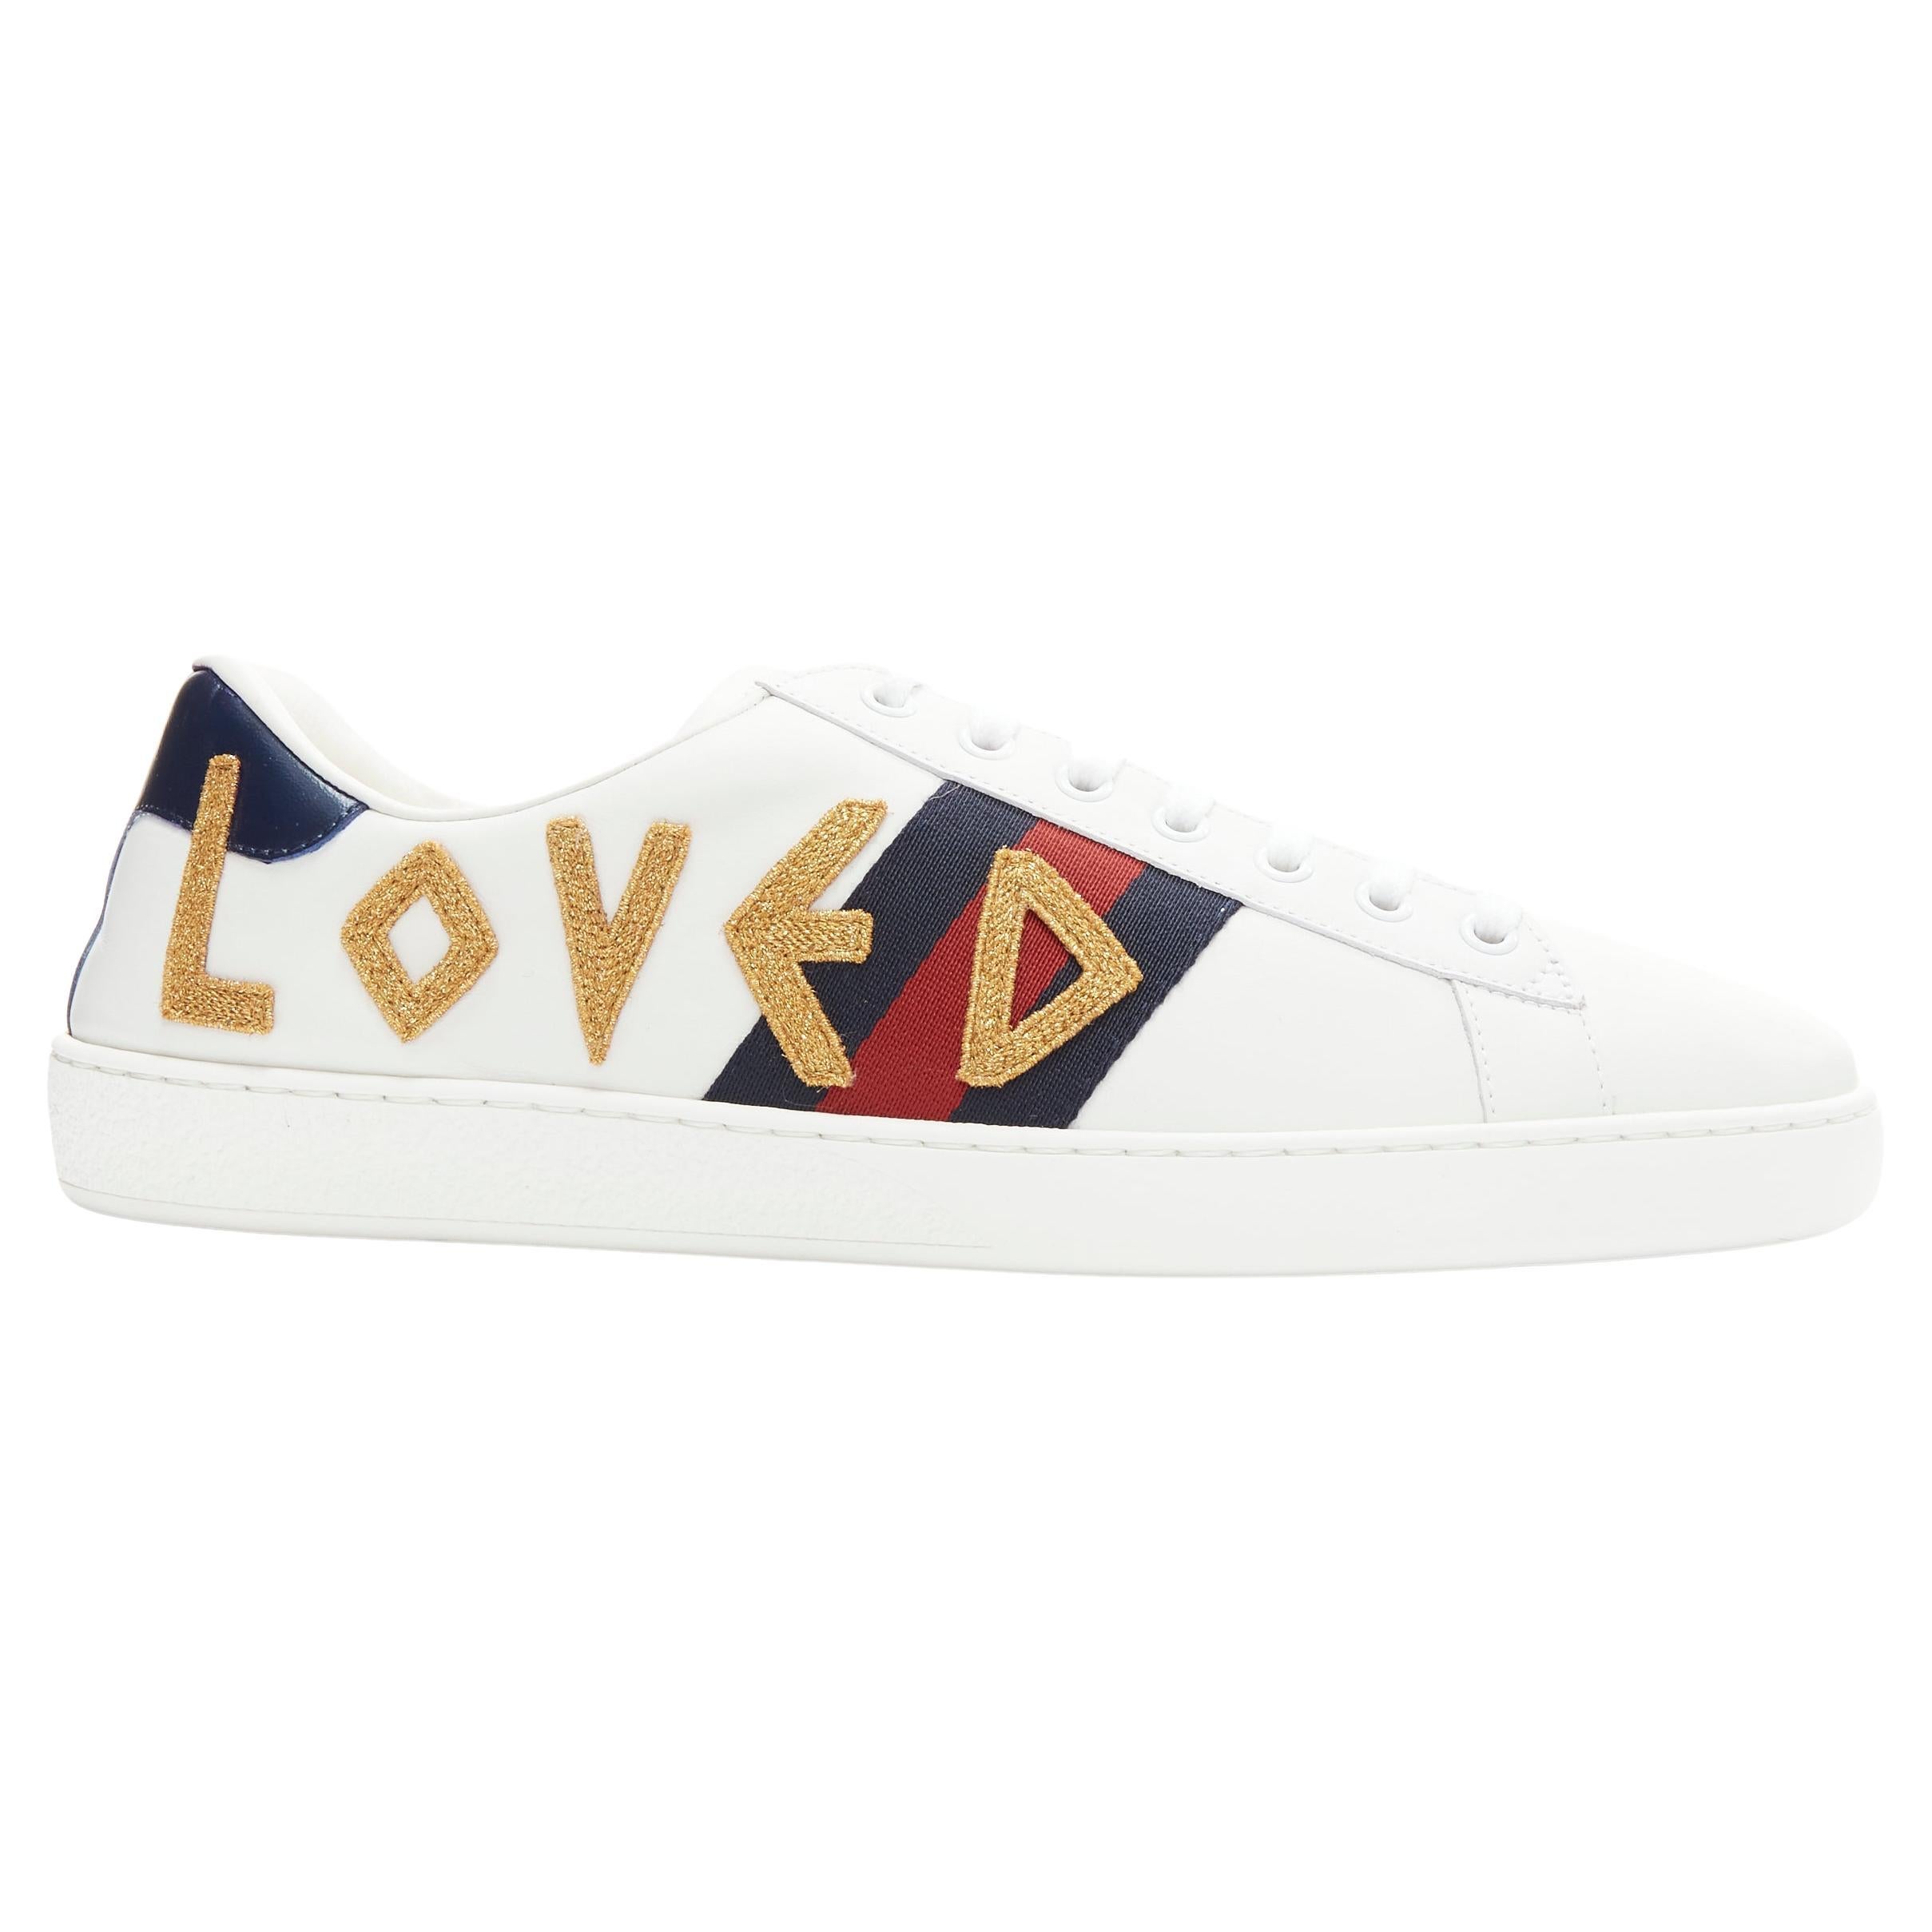 GUCCI Ace Loved gold letter patchwork white navy red web sneaker UK9 EU43 For Sale